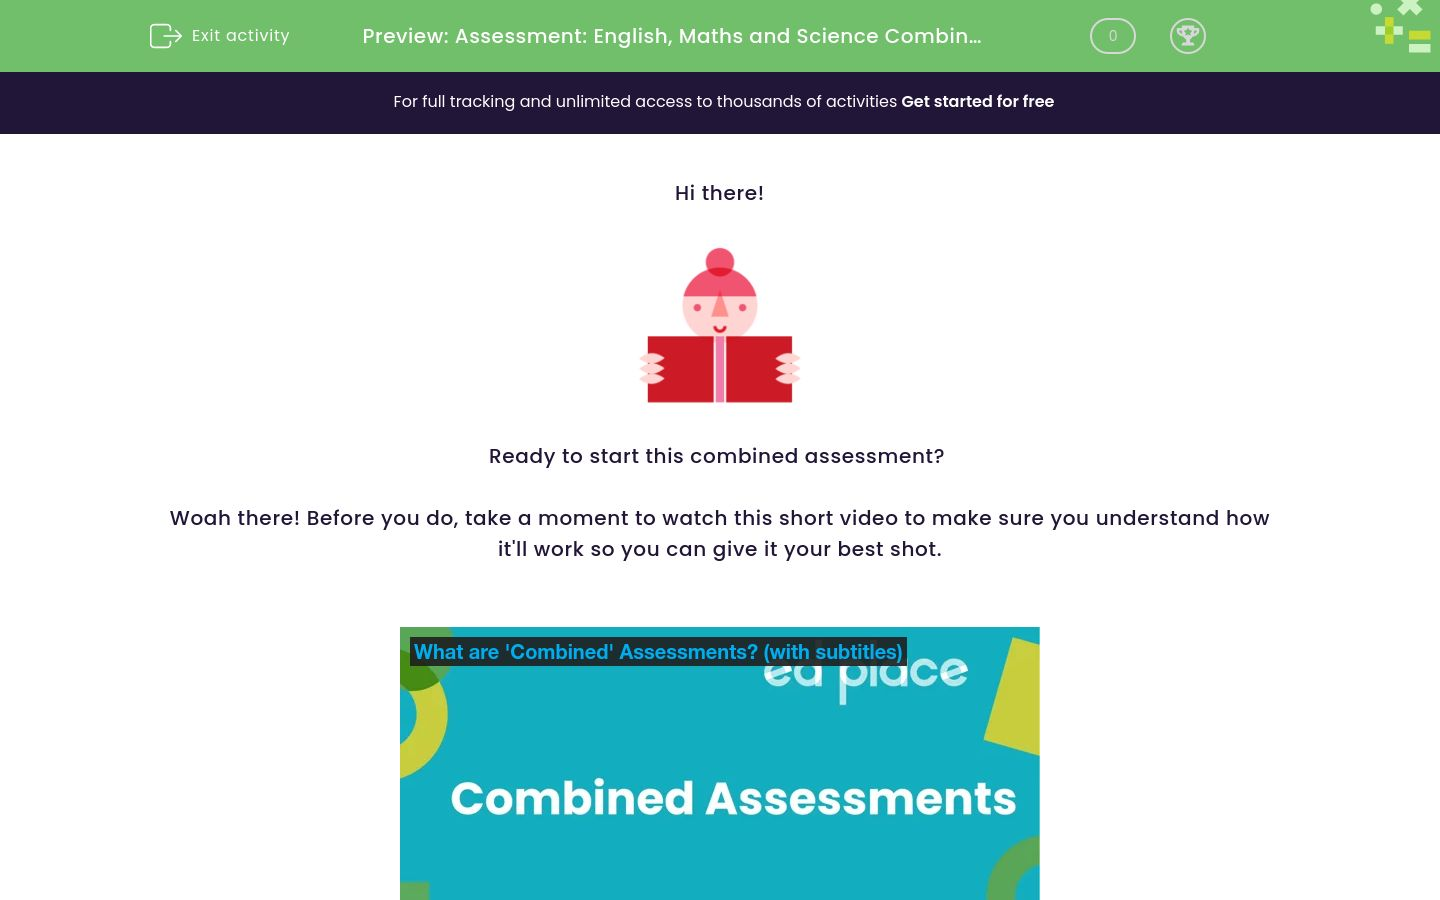 assessment-english-maths-and-science-combined-y8-worksheet-edplace